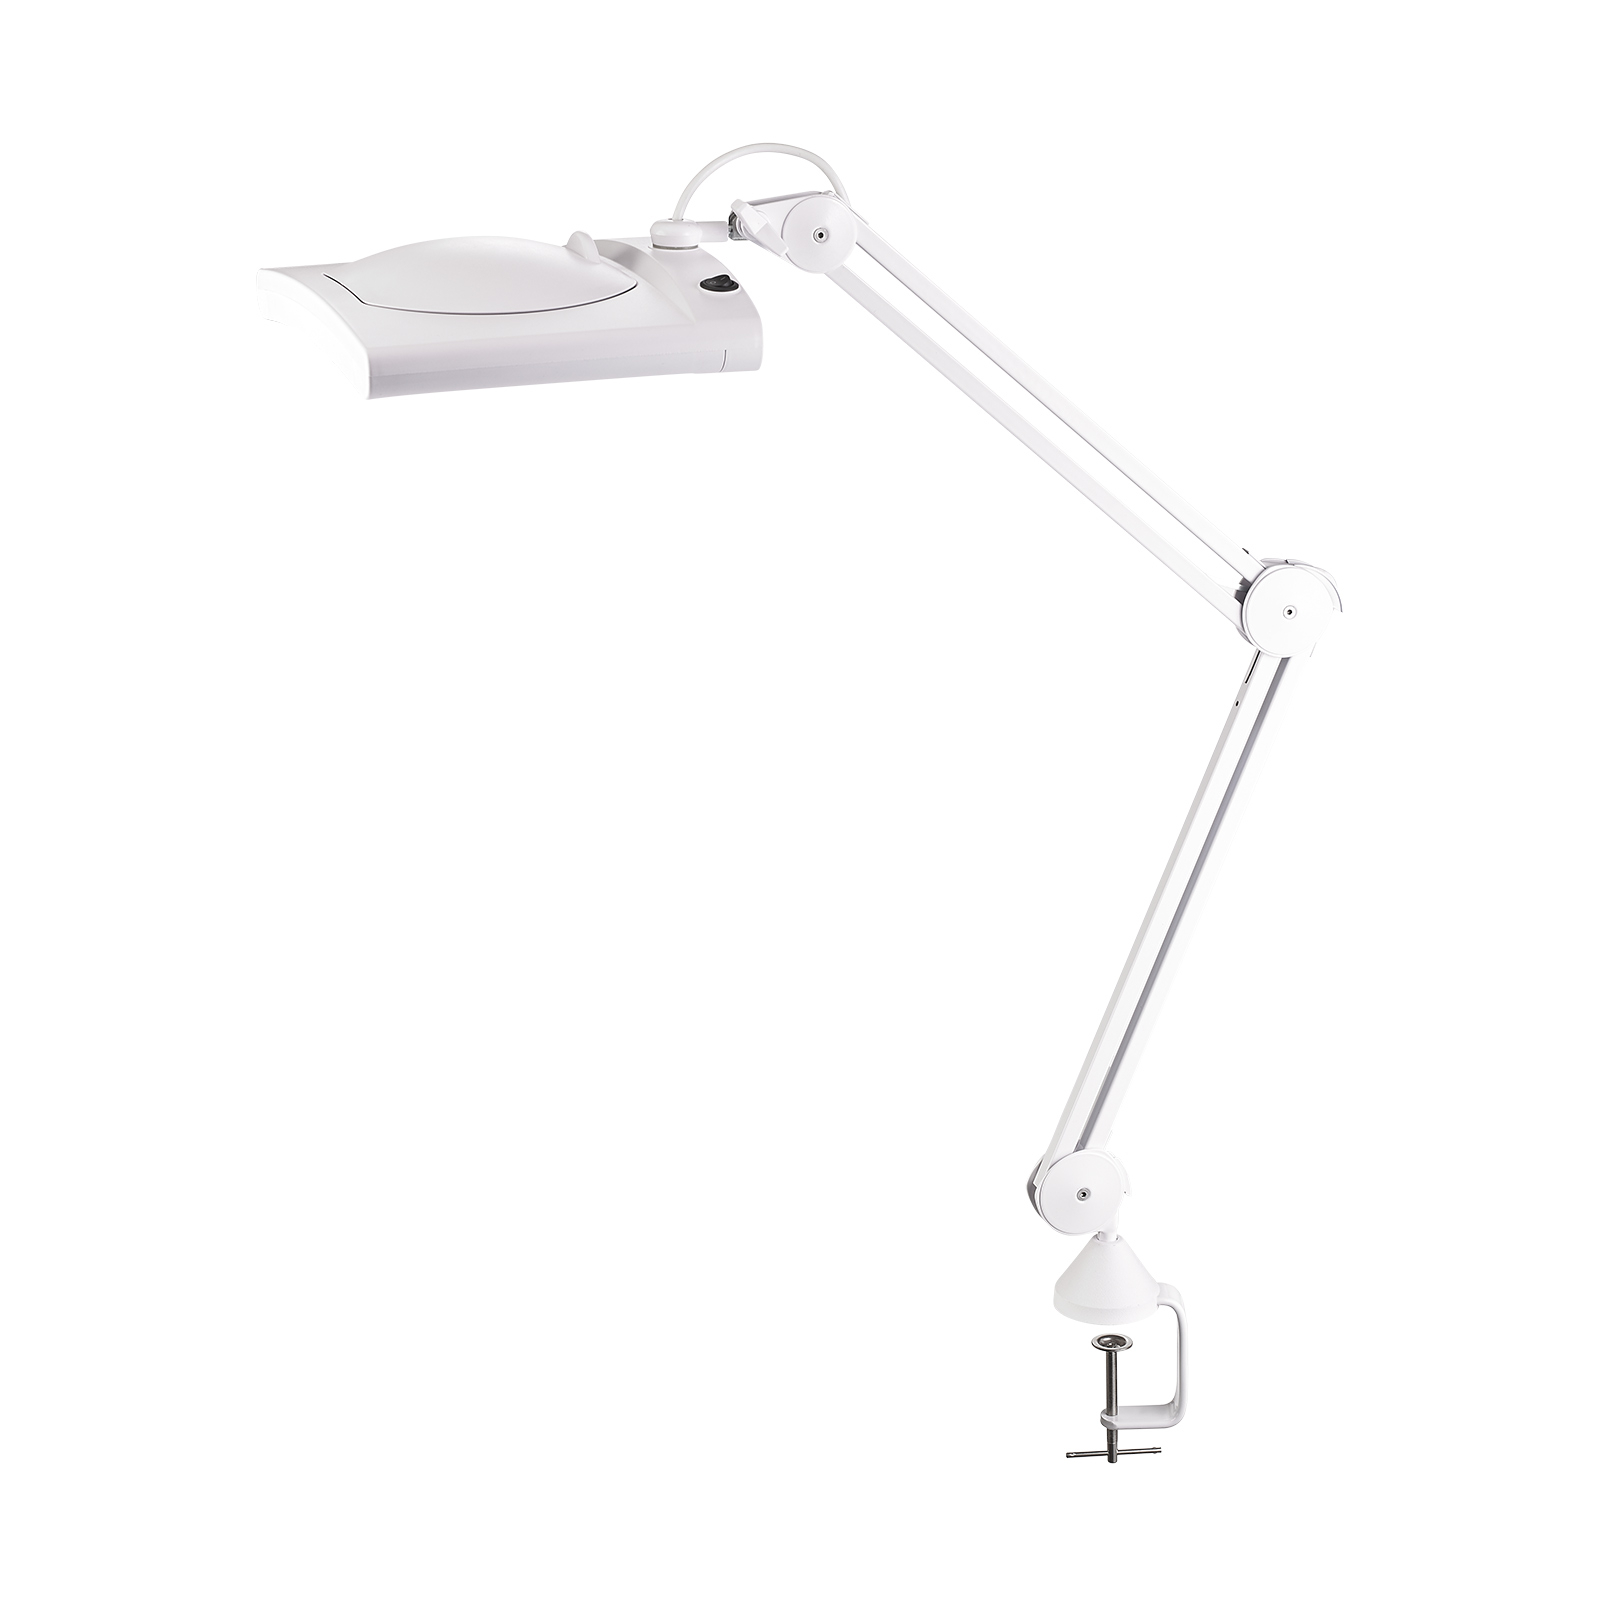 LED magnifying light 9223 with 5 dioptres, table clamp